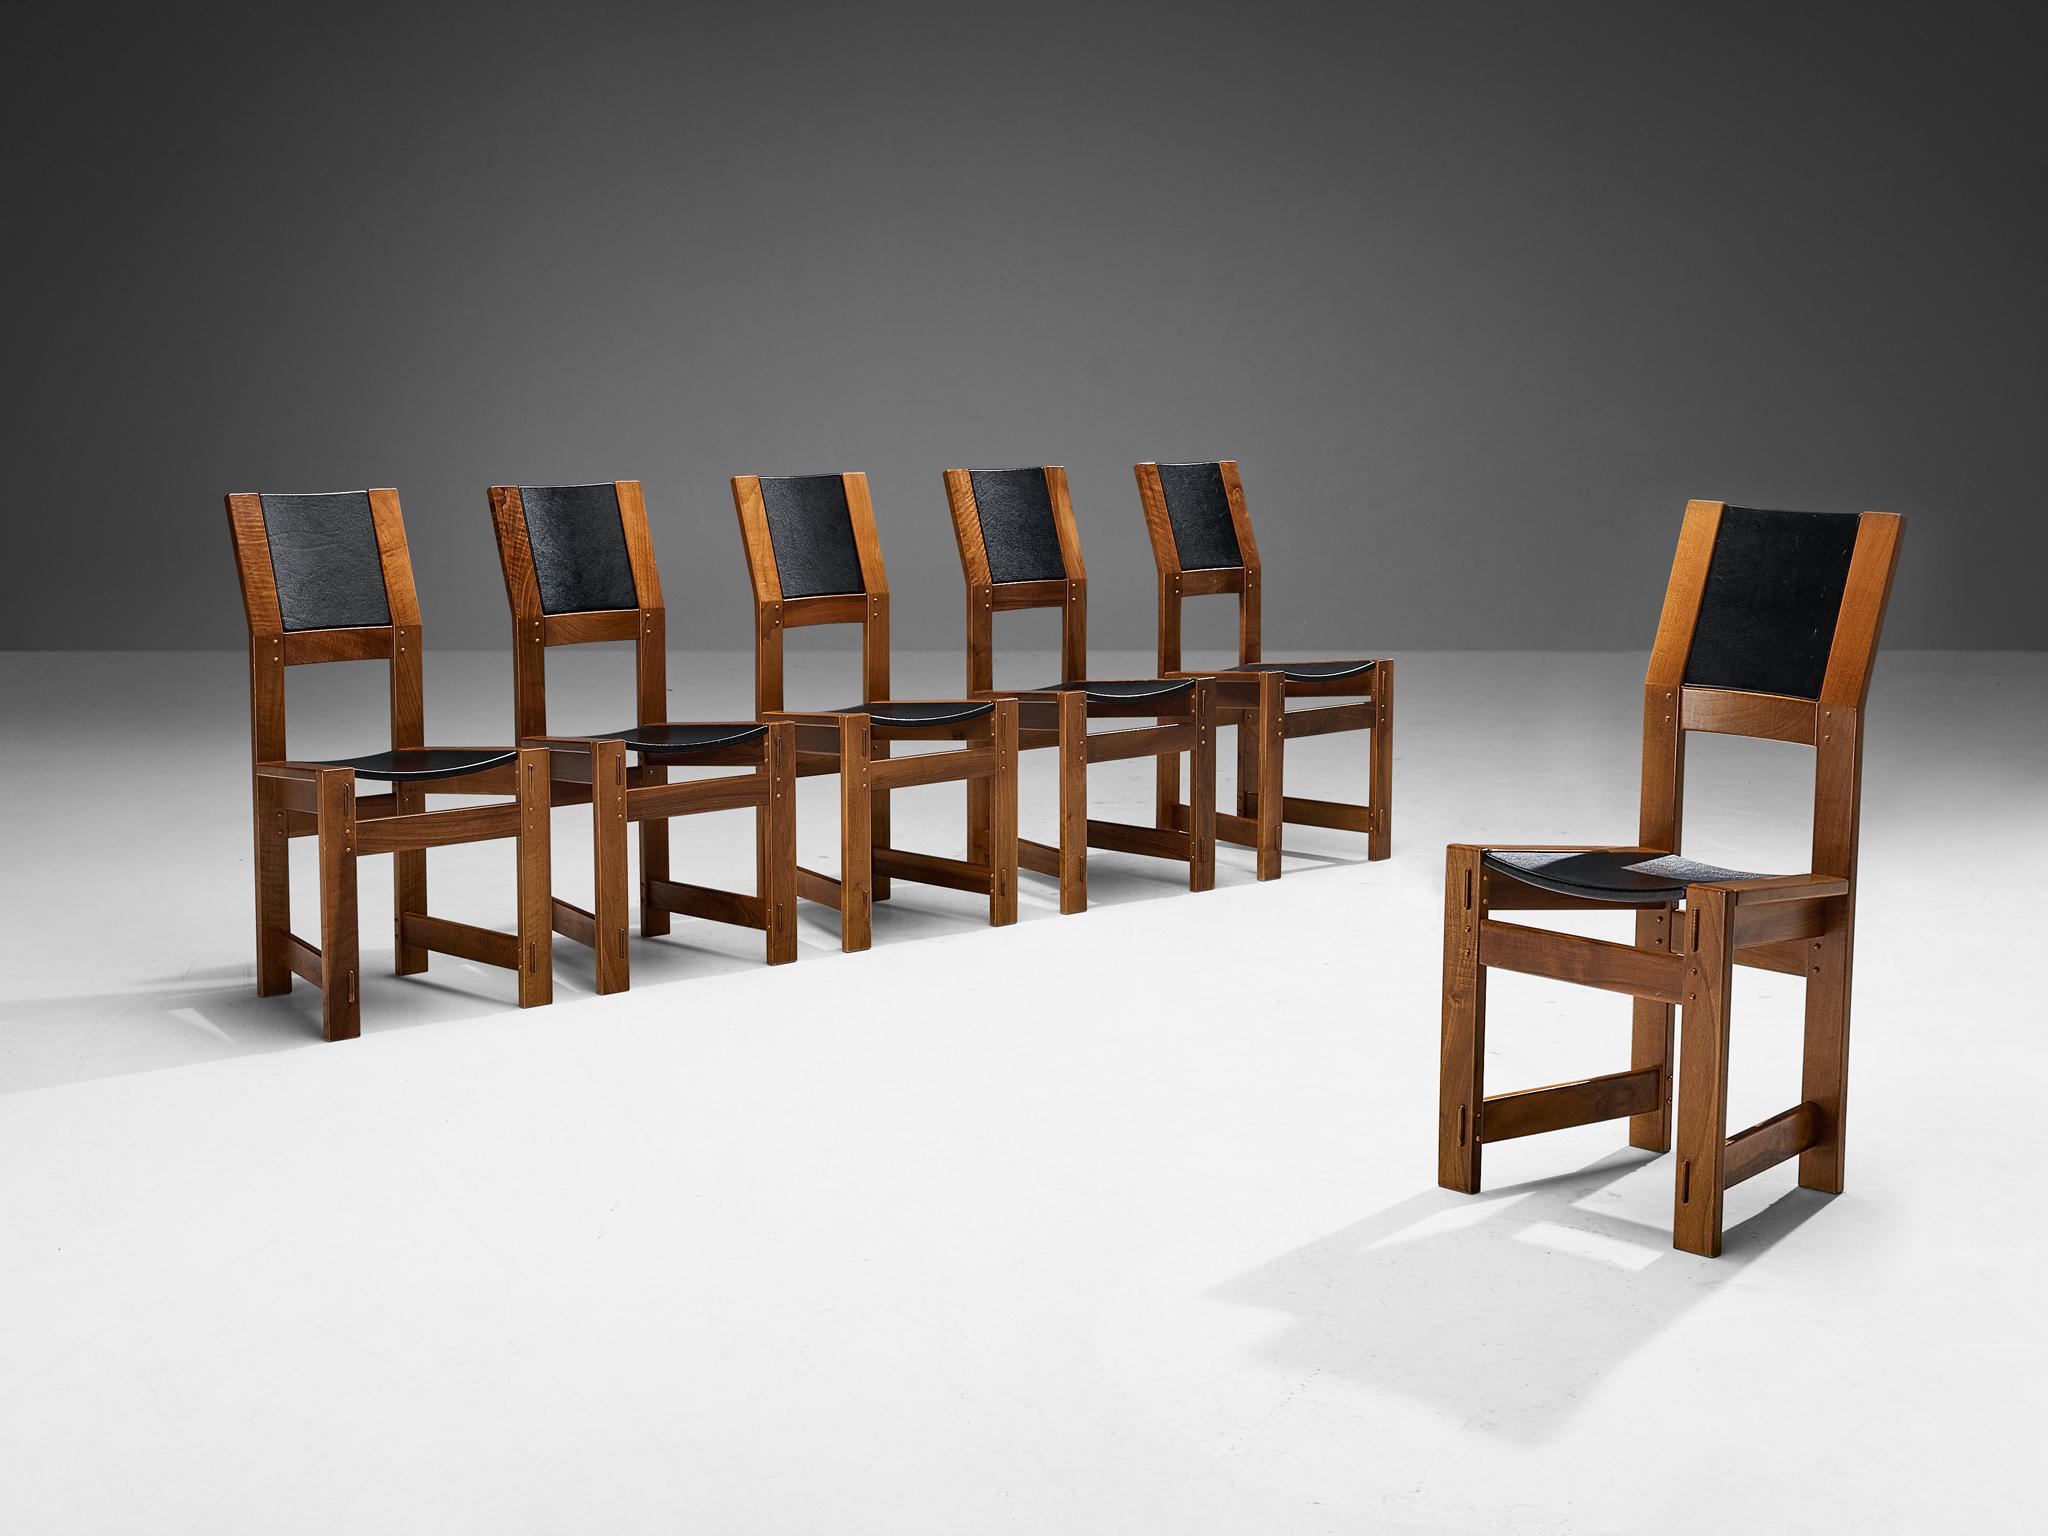 Giuseppe Rivadossi for Officina Rivadossi, set of six dining chairs, walnut, leatherette, Italy, circa 1980

An exceptional set of chairs by the Italian sculptor and designer Giuseppe Rivadossi, featuring a high level of craftsmanship in woodwork.